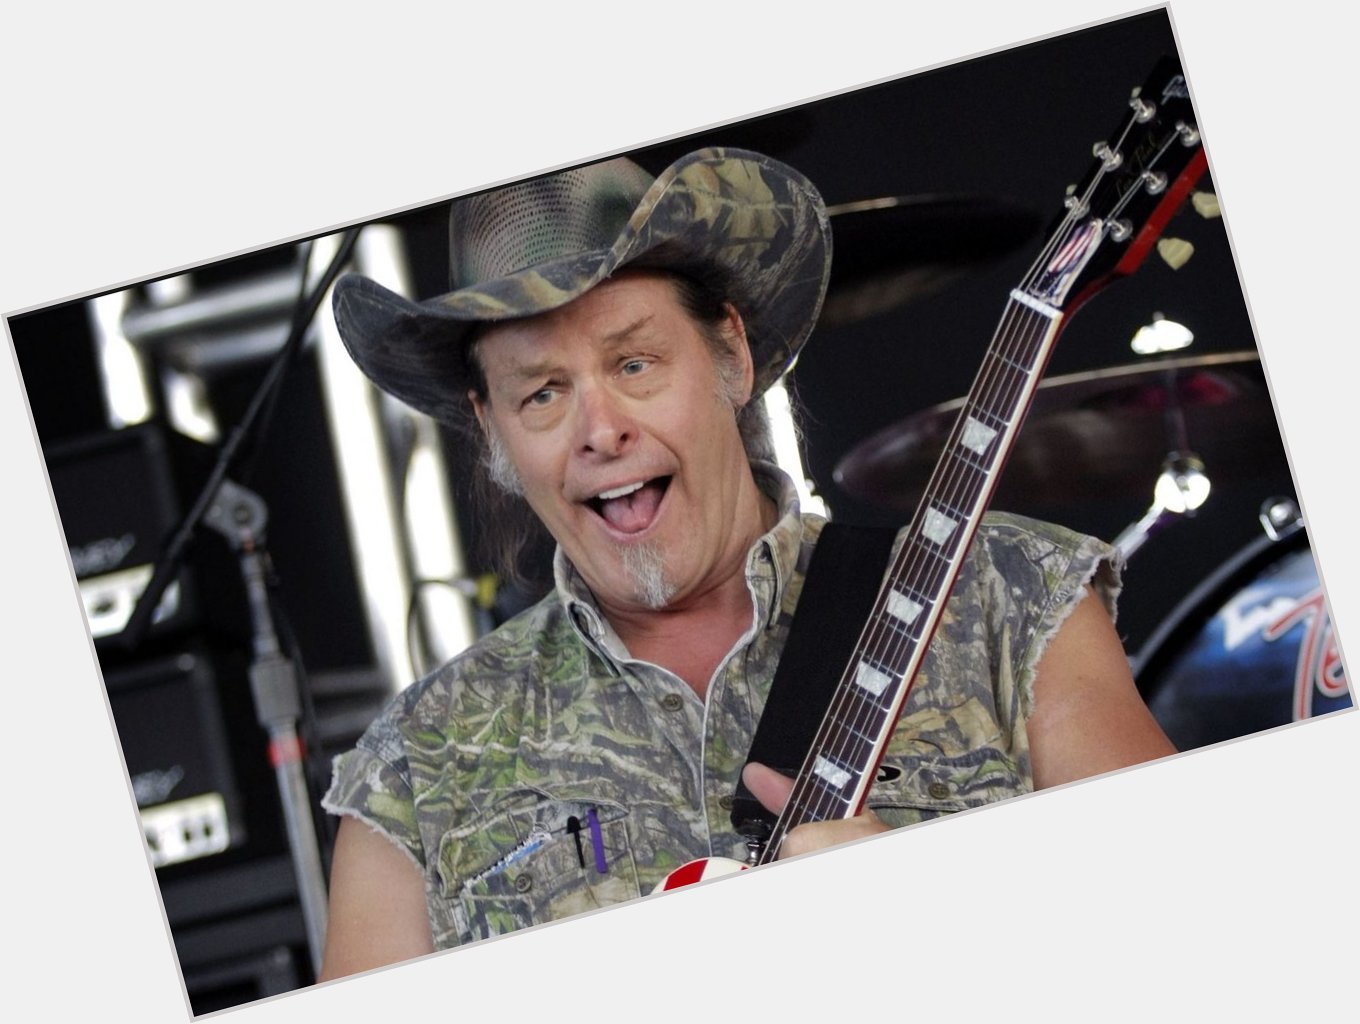 Happy 70th to Rocker and Political Activist Ted Nugent, born December 13, 1948   